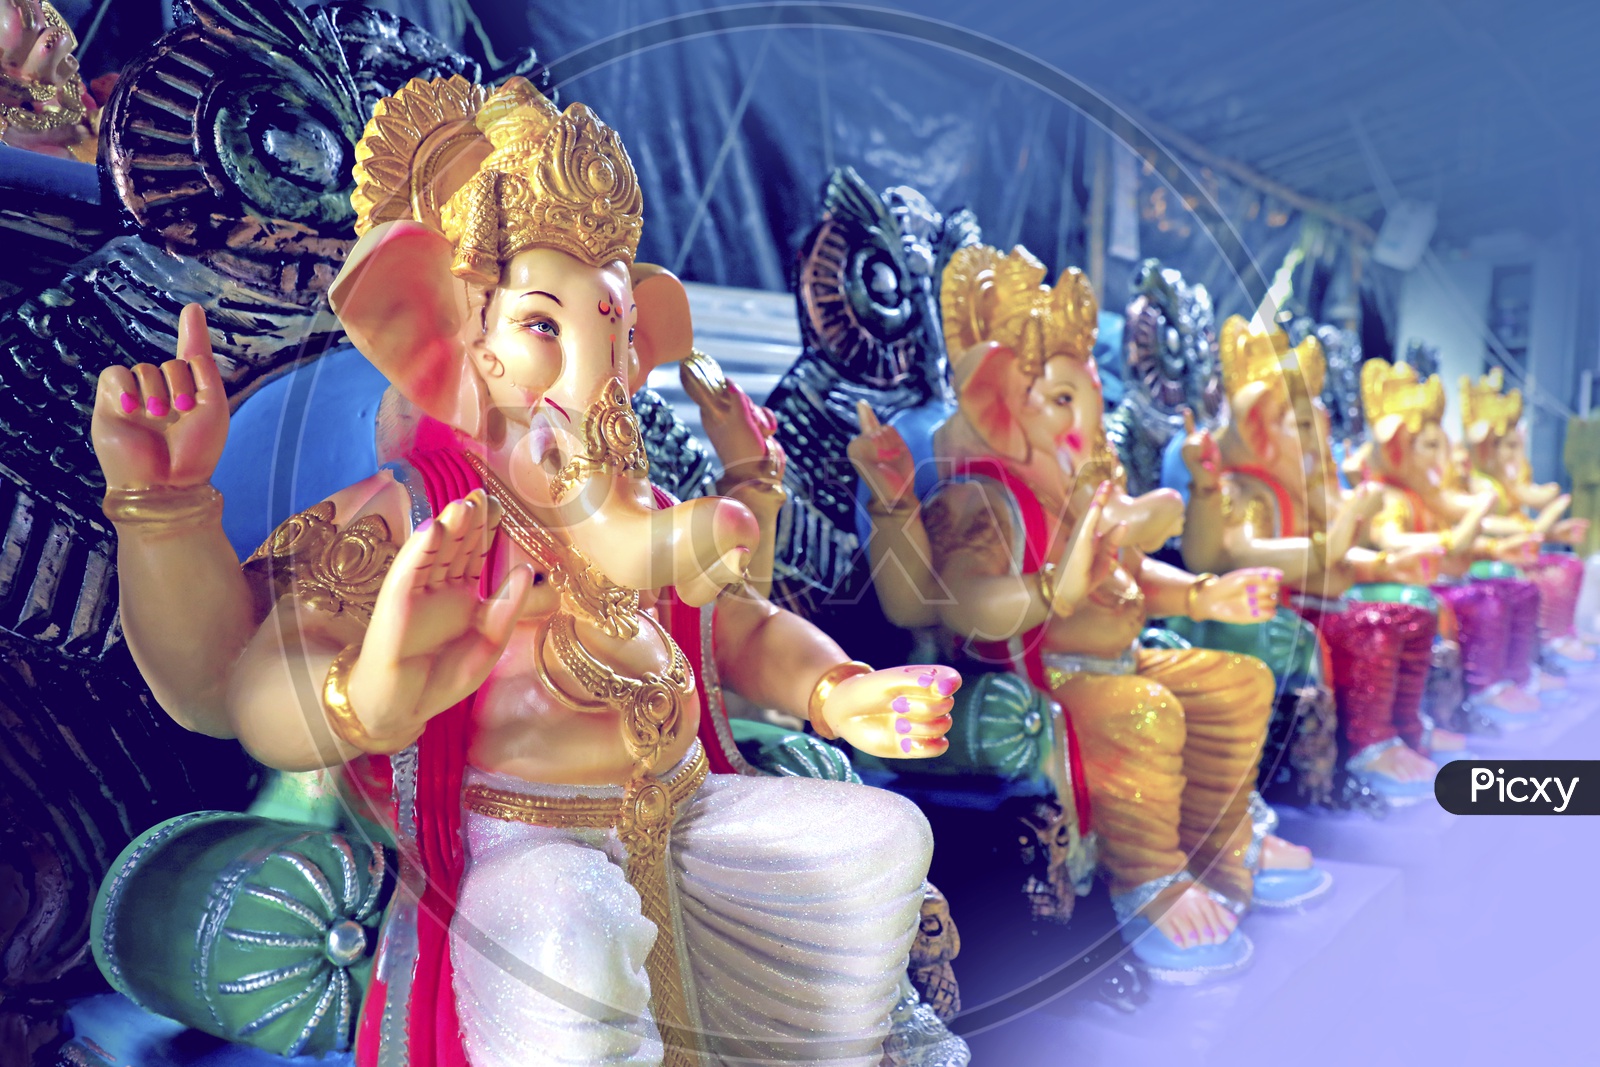 Lord Ganesh Idol's placed in a sequence